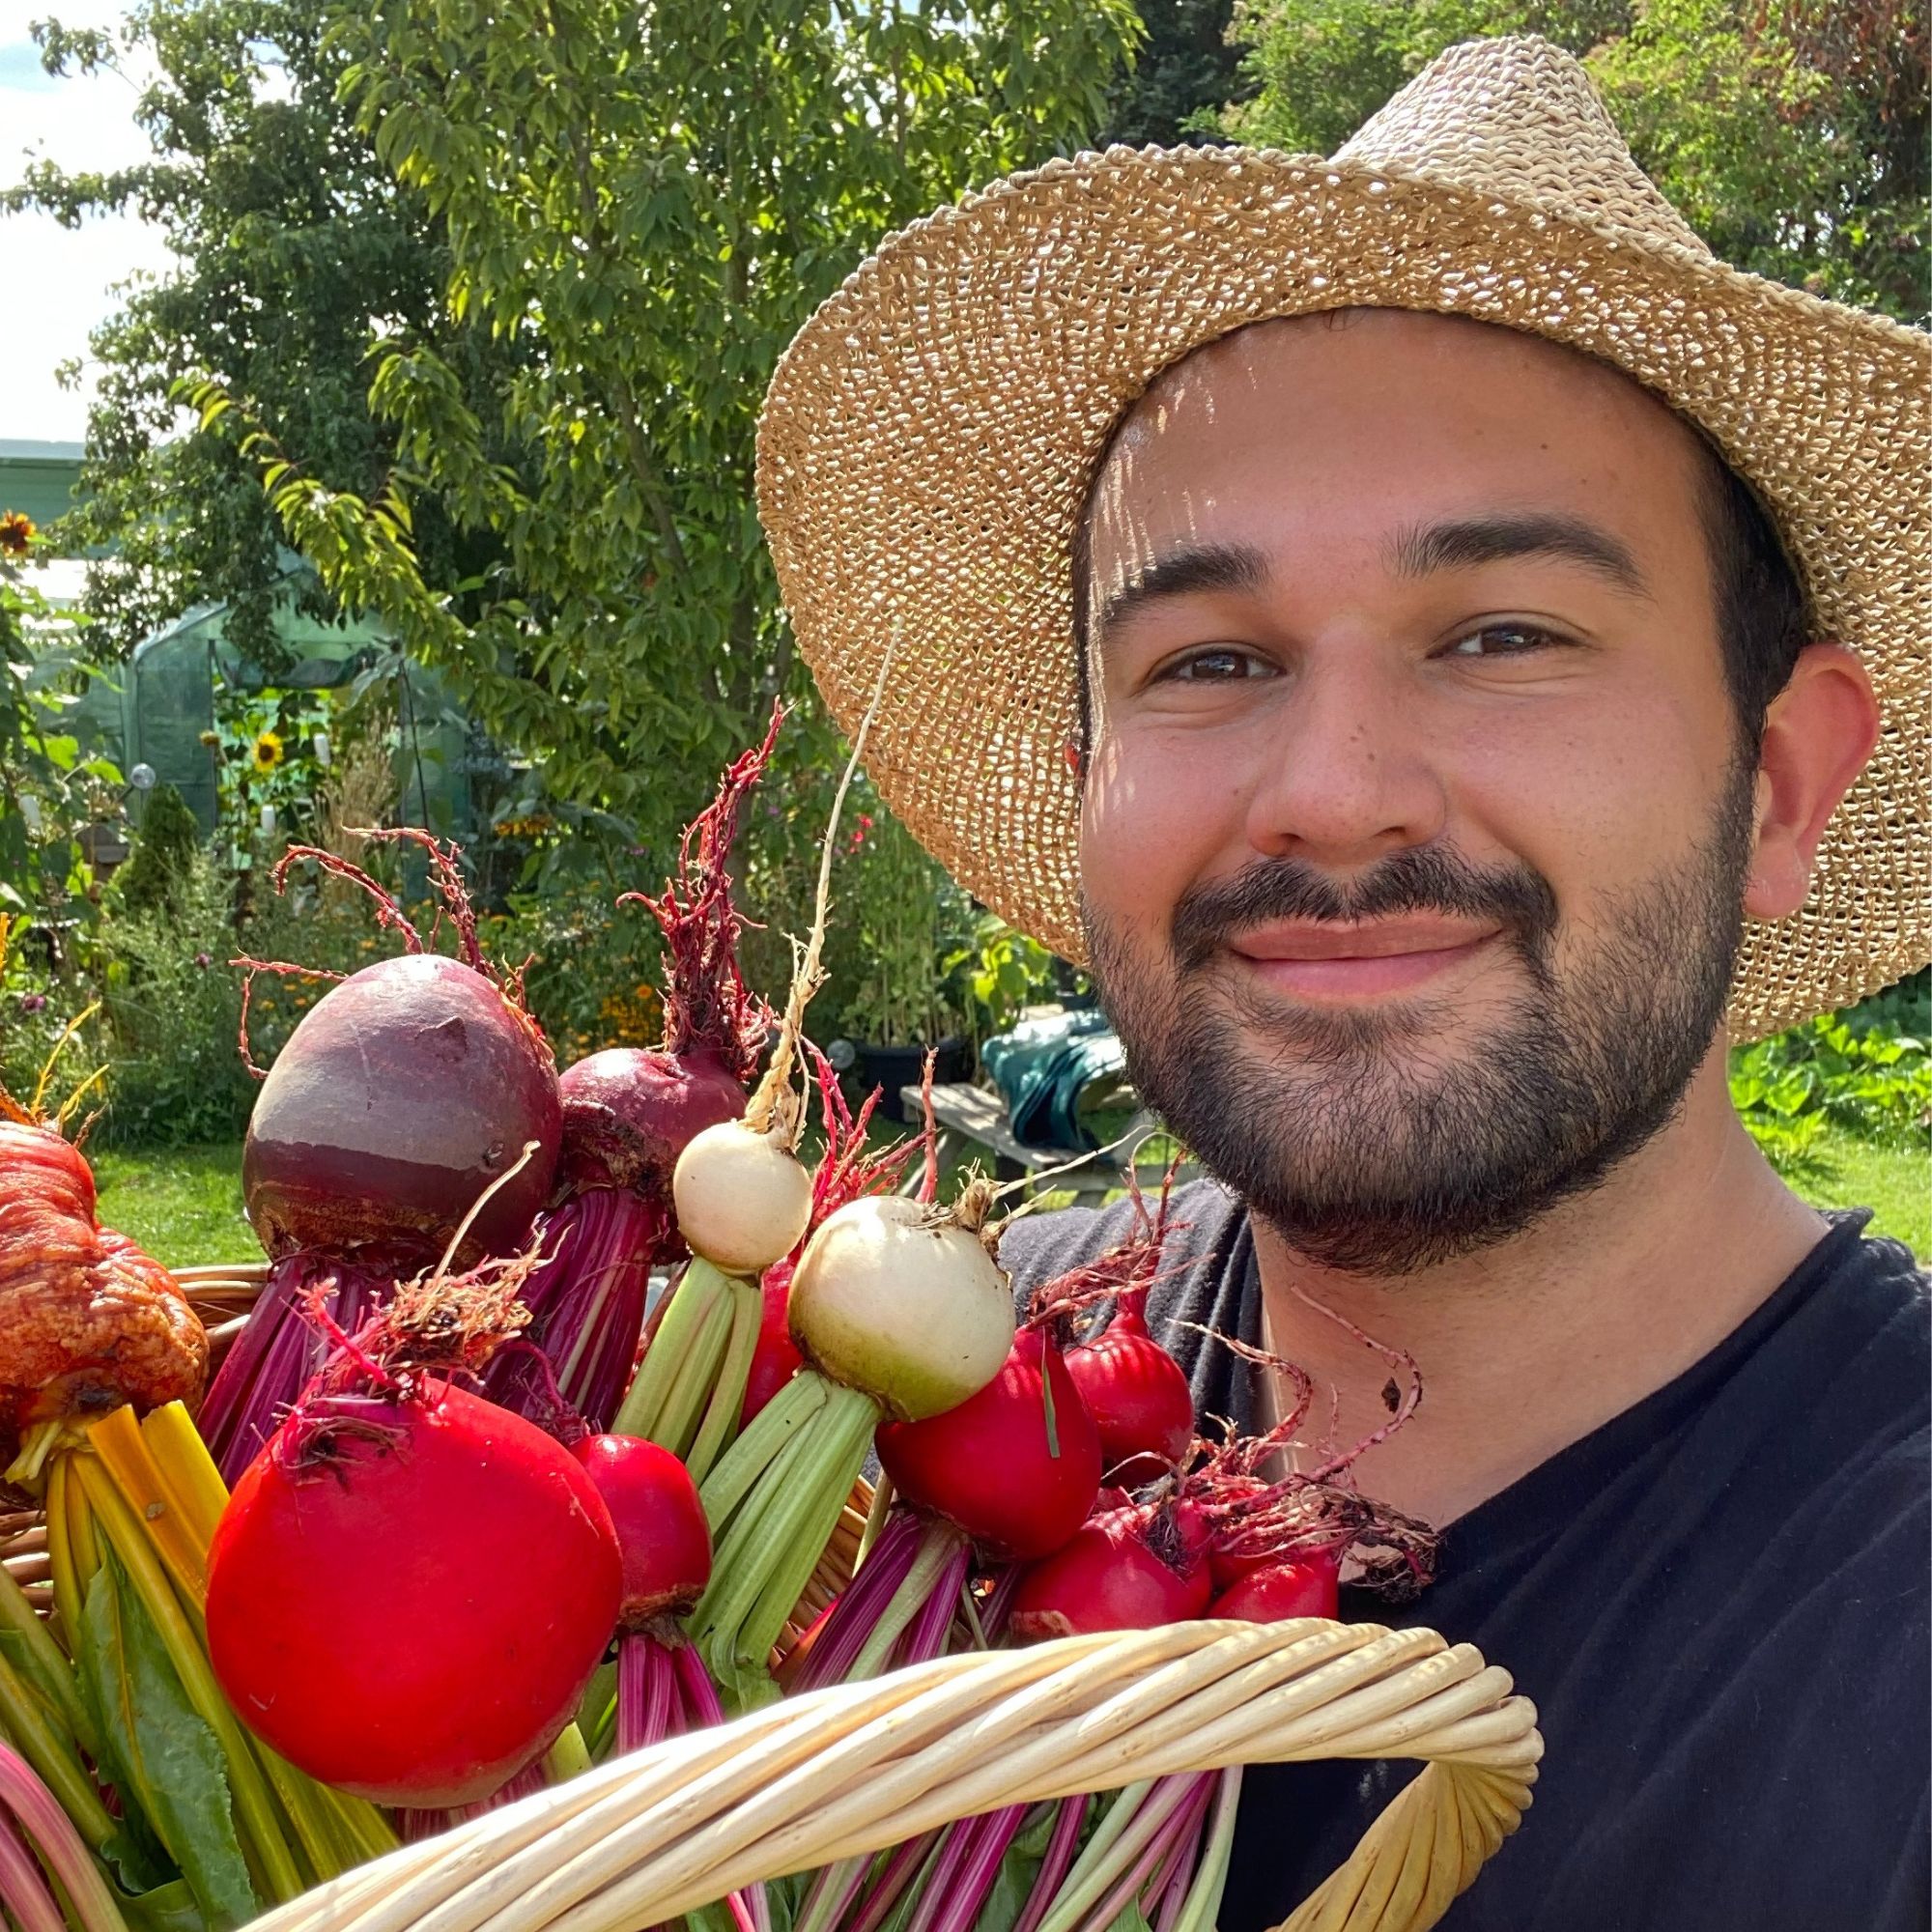 Joseph Clark, of Joe's Garden fame, poses in his backyard holding a glut of produce and wearing a straw hat